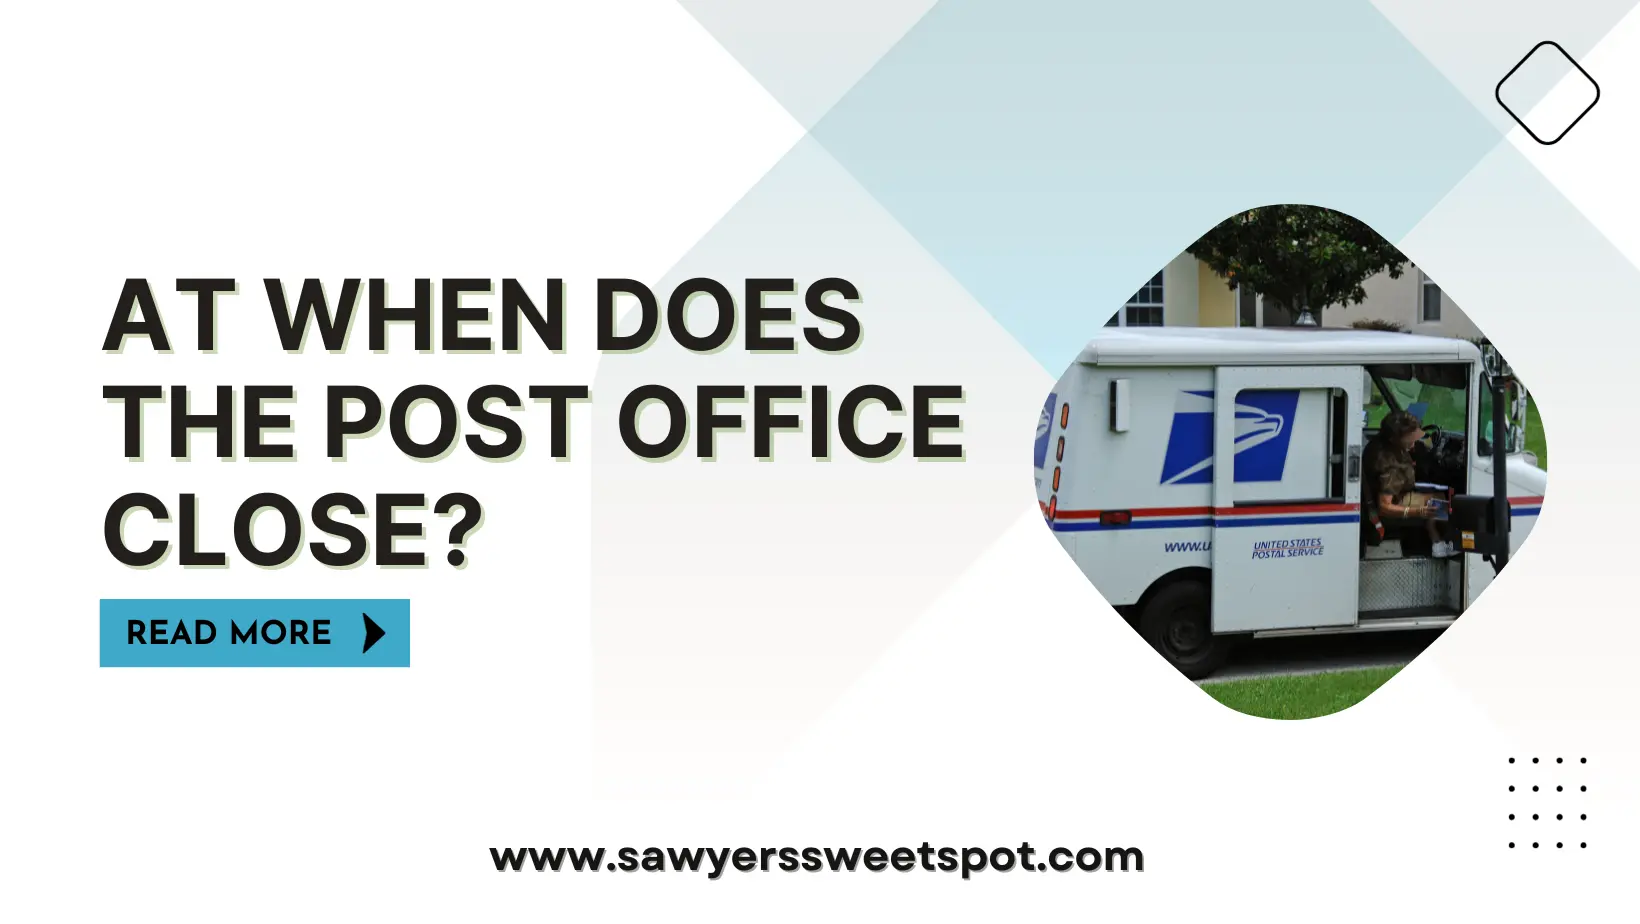 At When Does The Post Office Close?